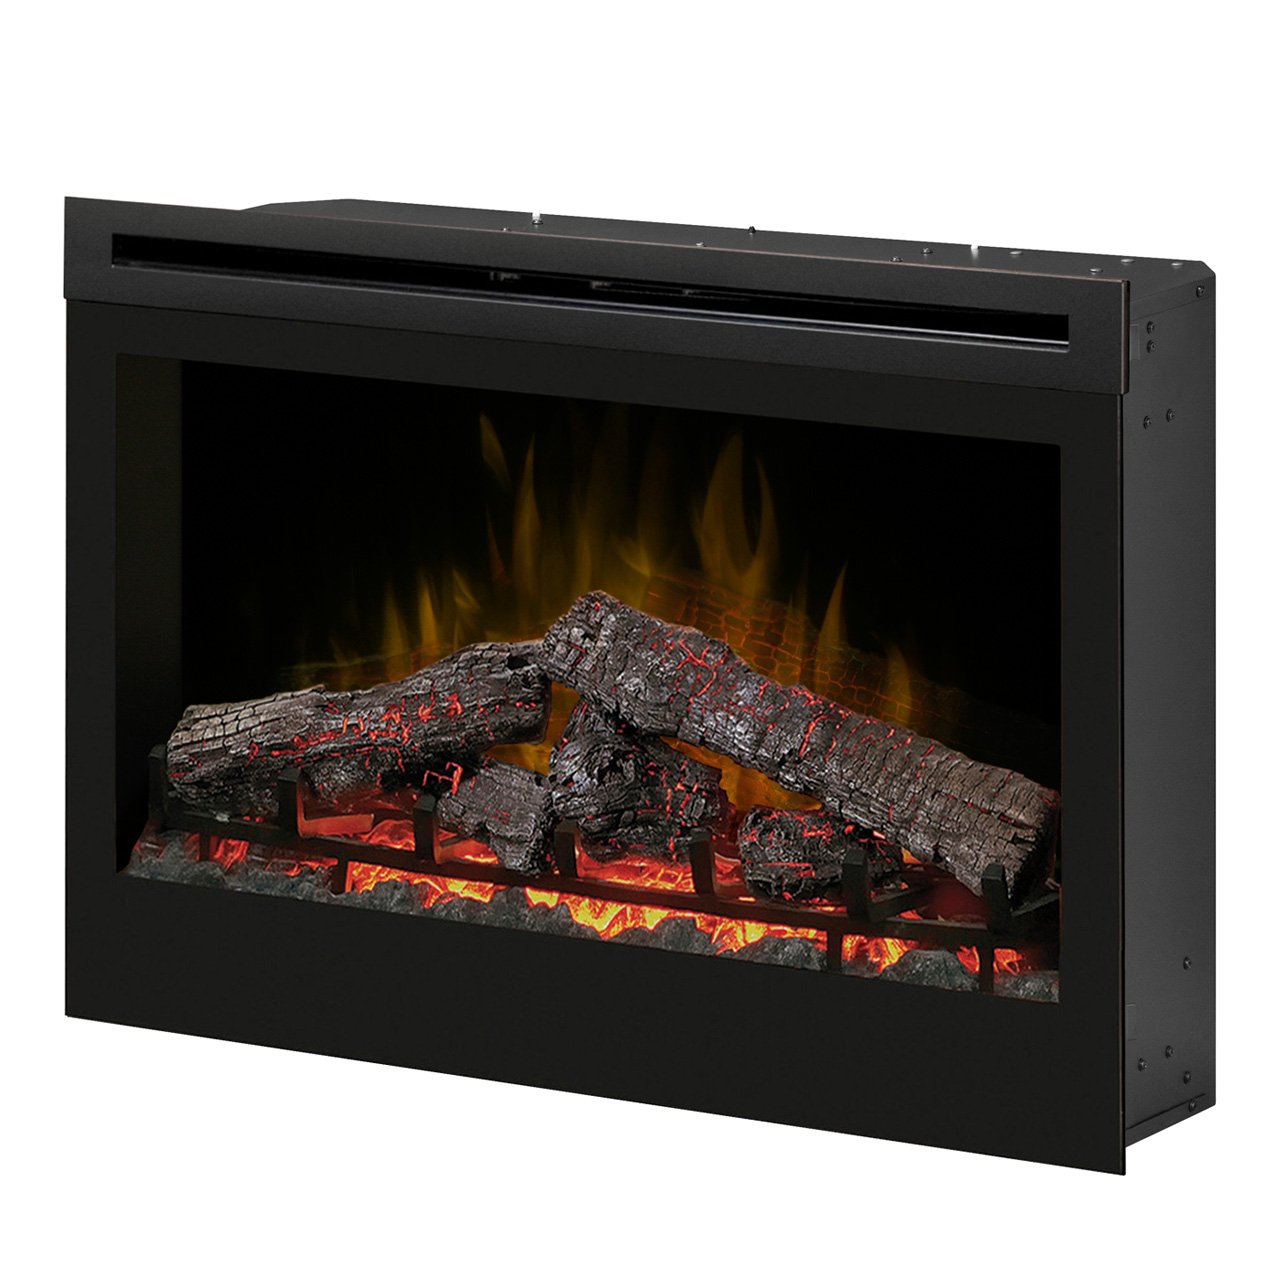 How to Heat Your House with A Fireplace Lovely Dimplex Df3033st 33 Inch Self Trimming Electric Fireplace Insert